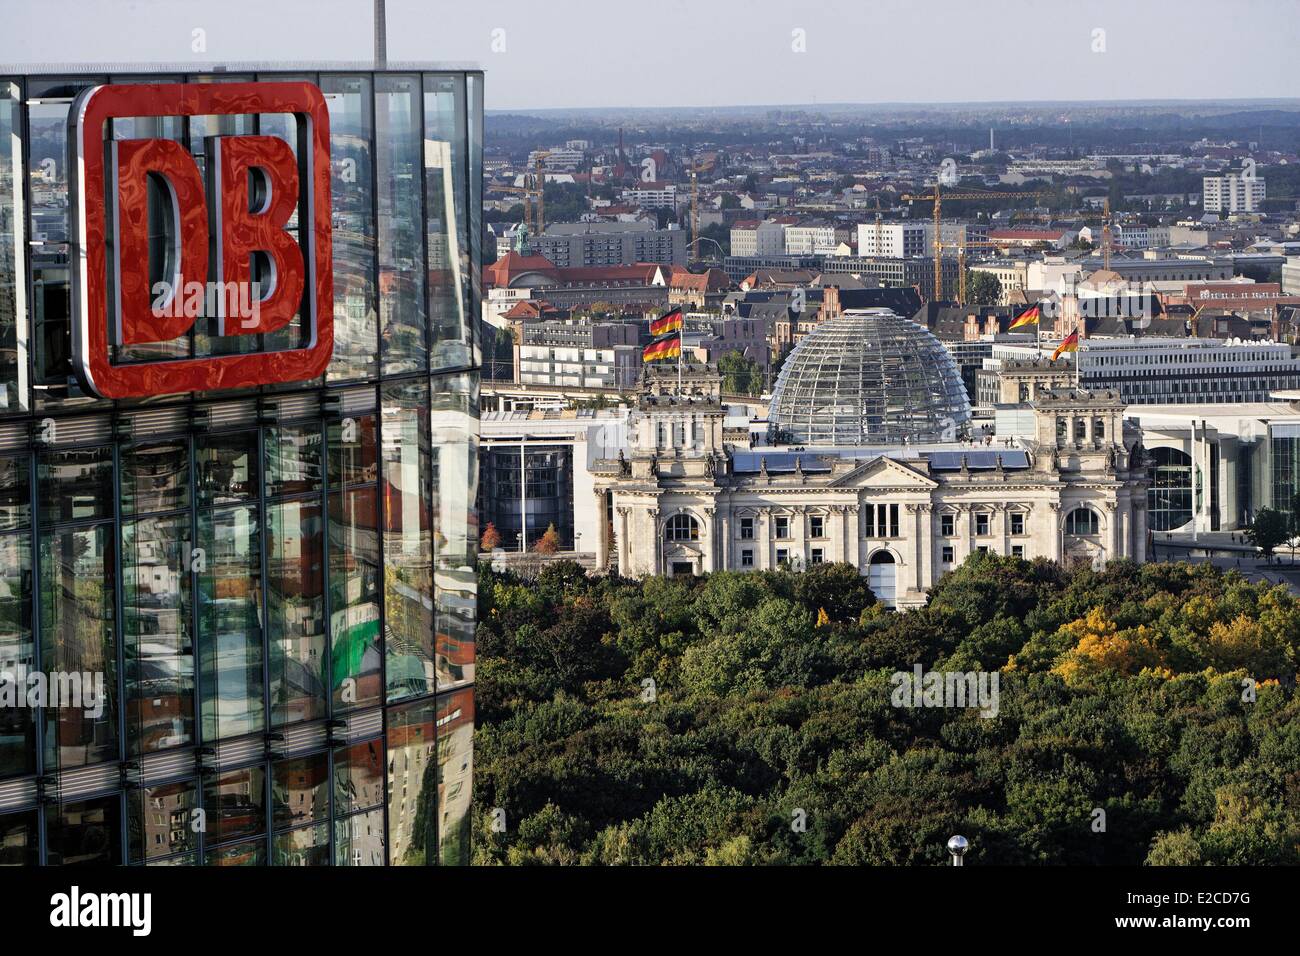 Germany, Berlin, Potsdamer Platz, the Reichstag and DB tower (headquarters of Deutche Bahn) Stock Photo